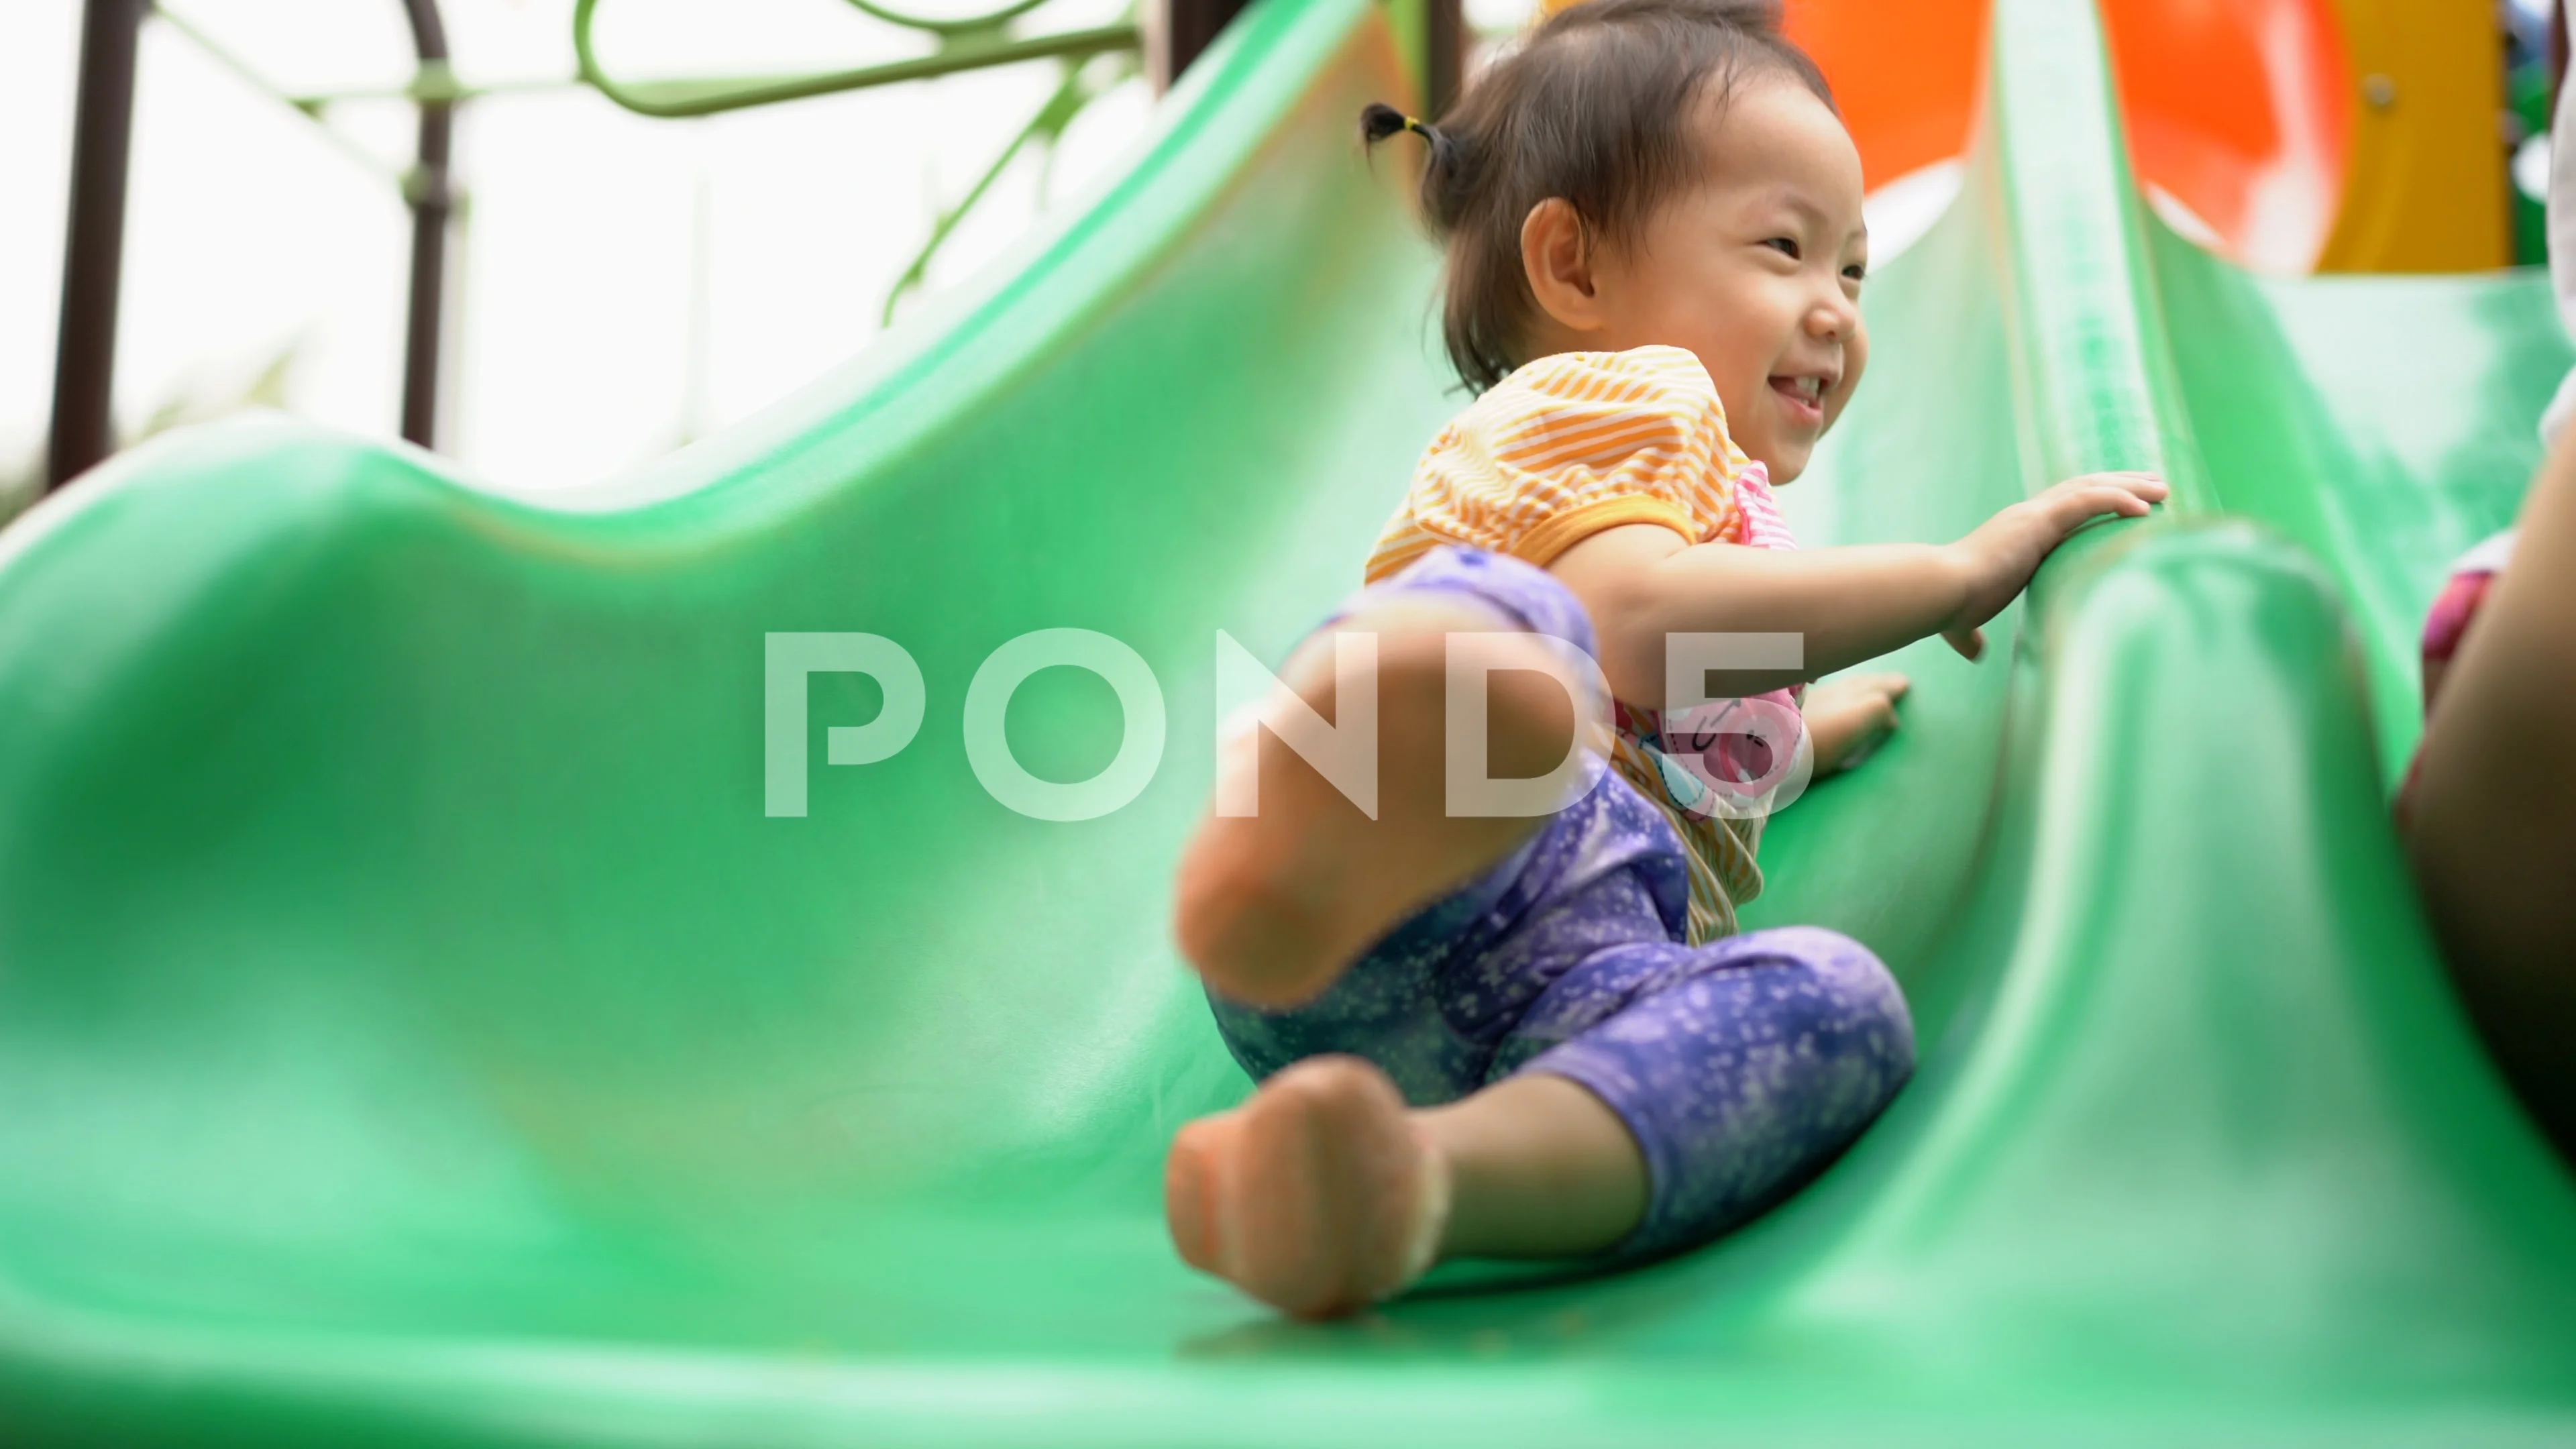 A Little Girl Sliding Down A Green Slide At The Playground. by